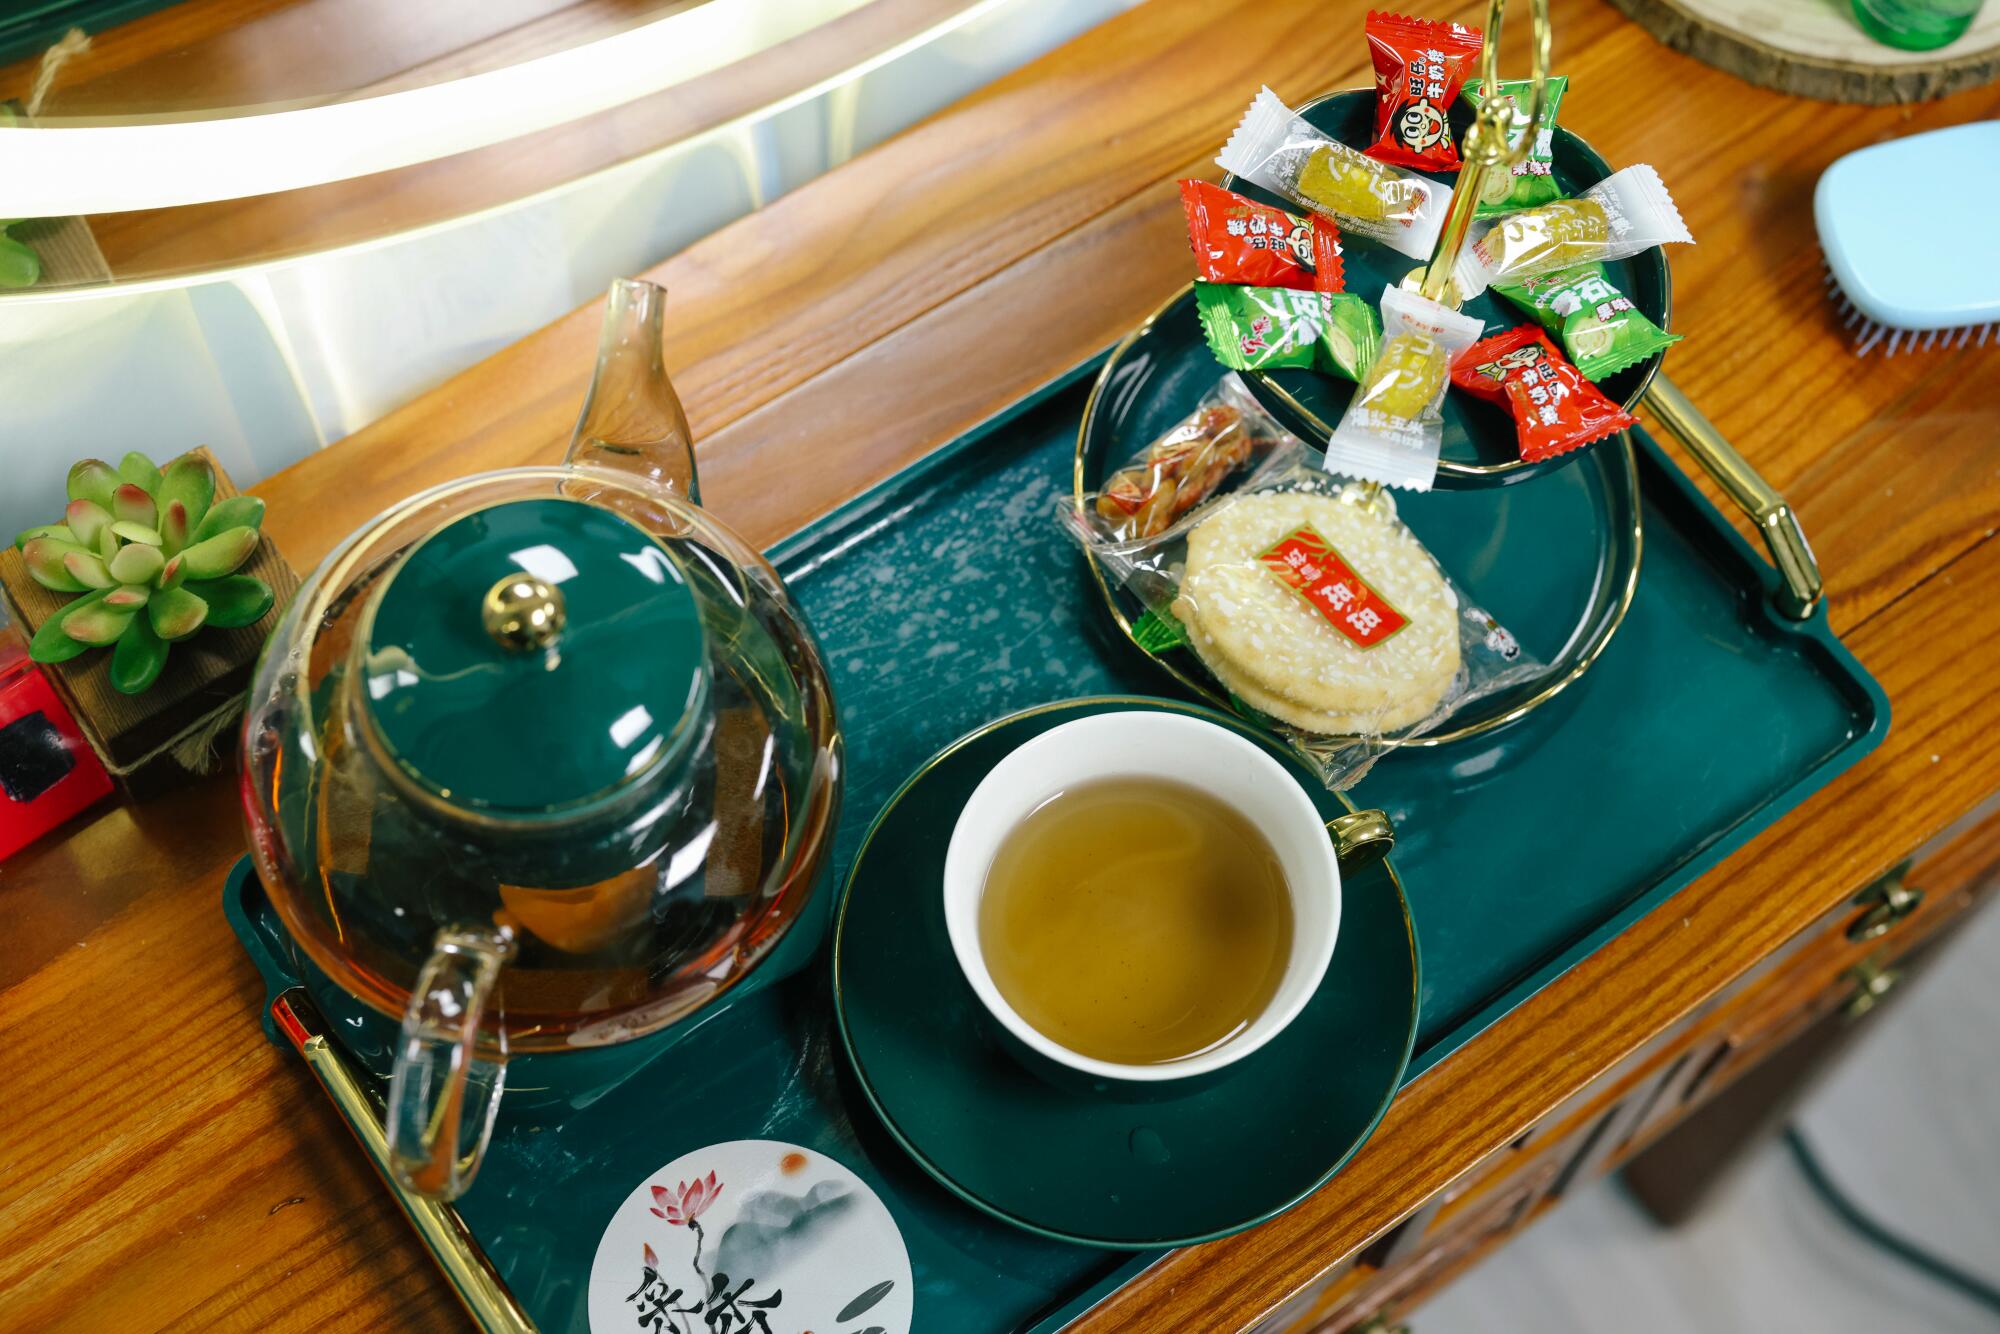 A tray of tea in a cup and a glass teapot, with assorted snacks